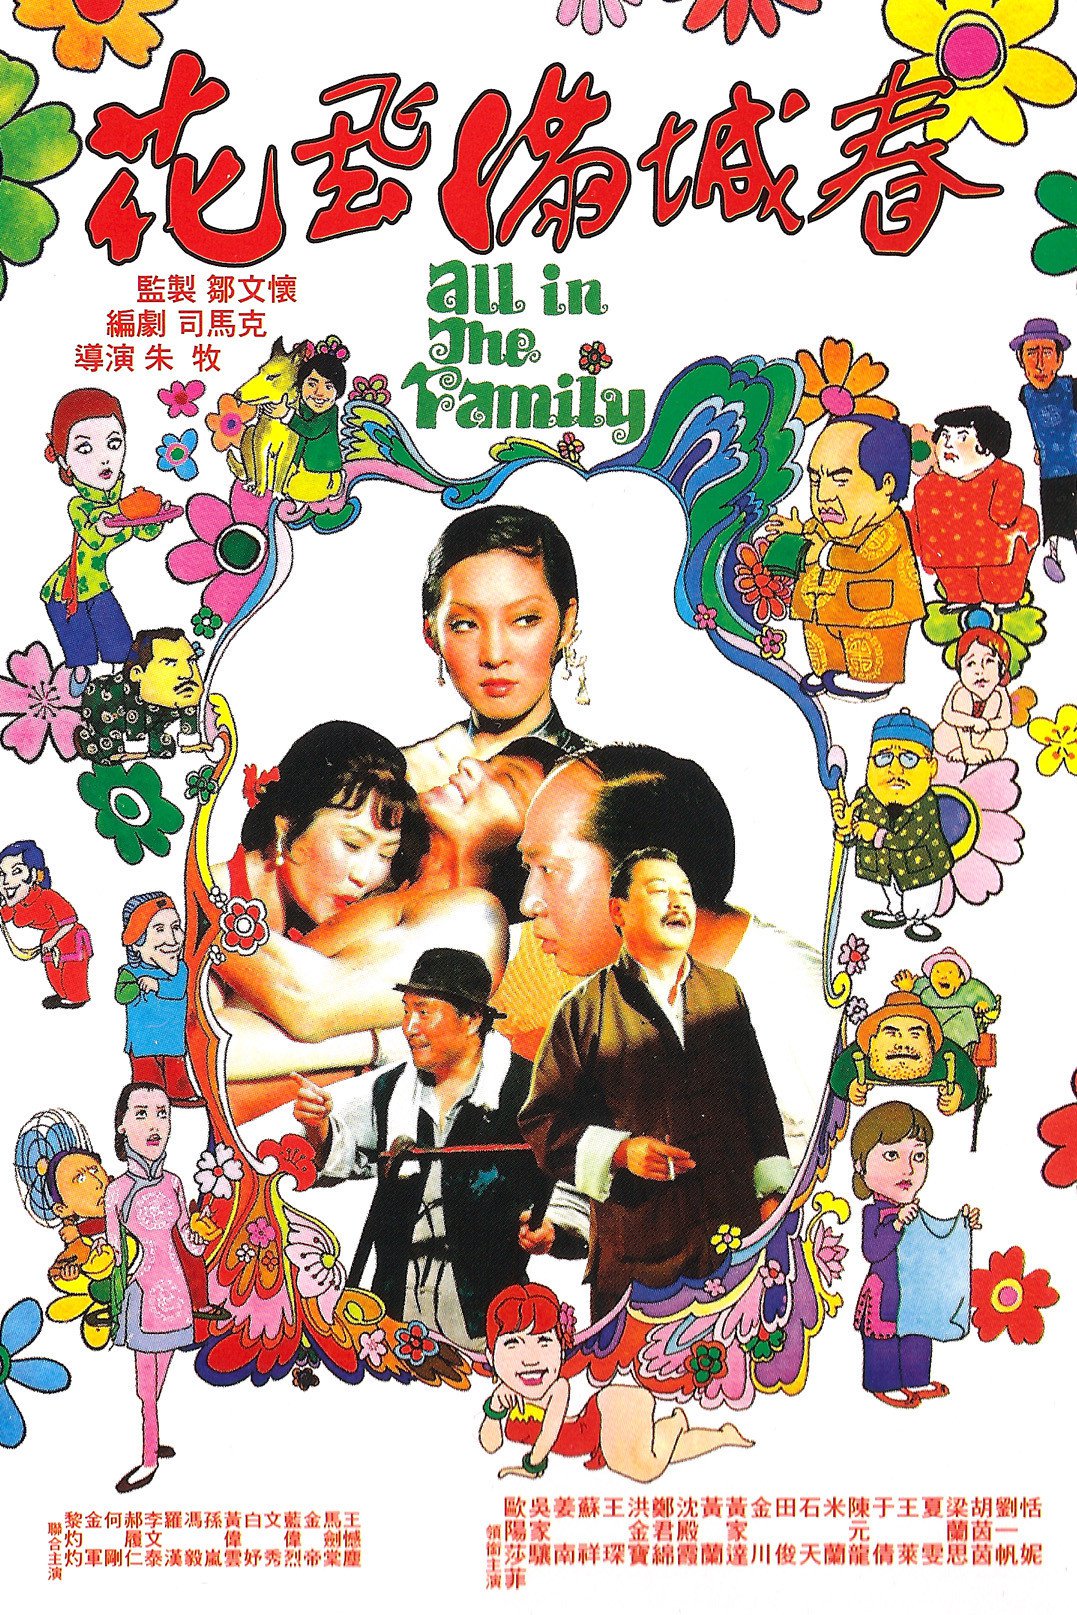 Plakat von "All in the Family"